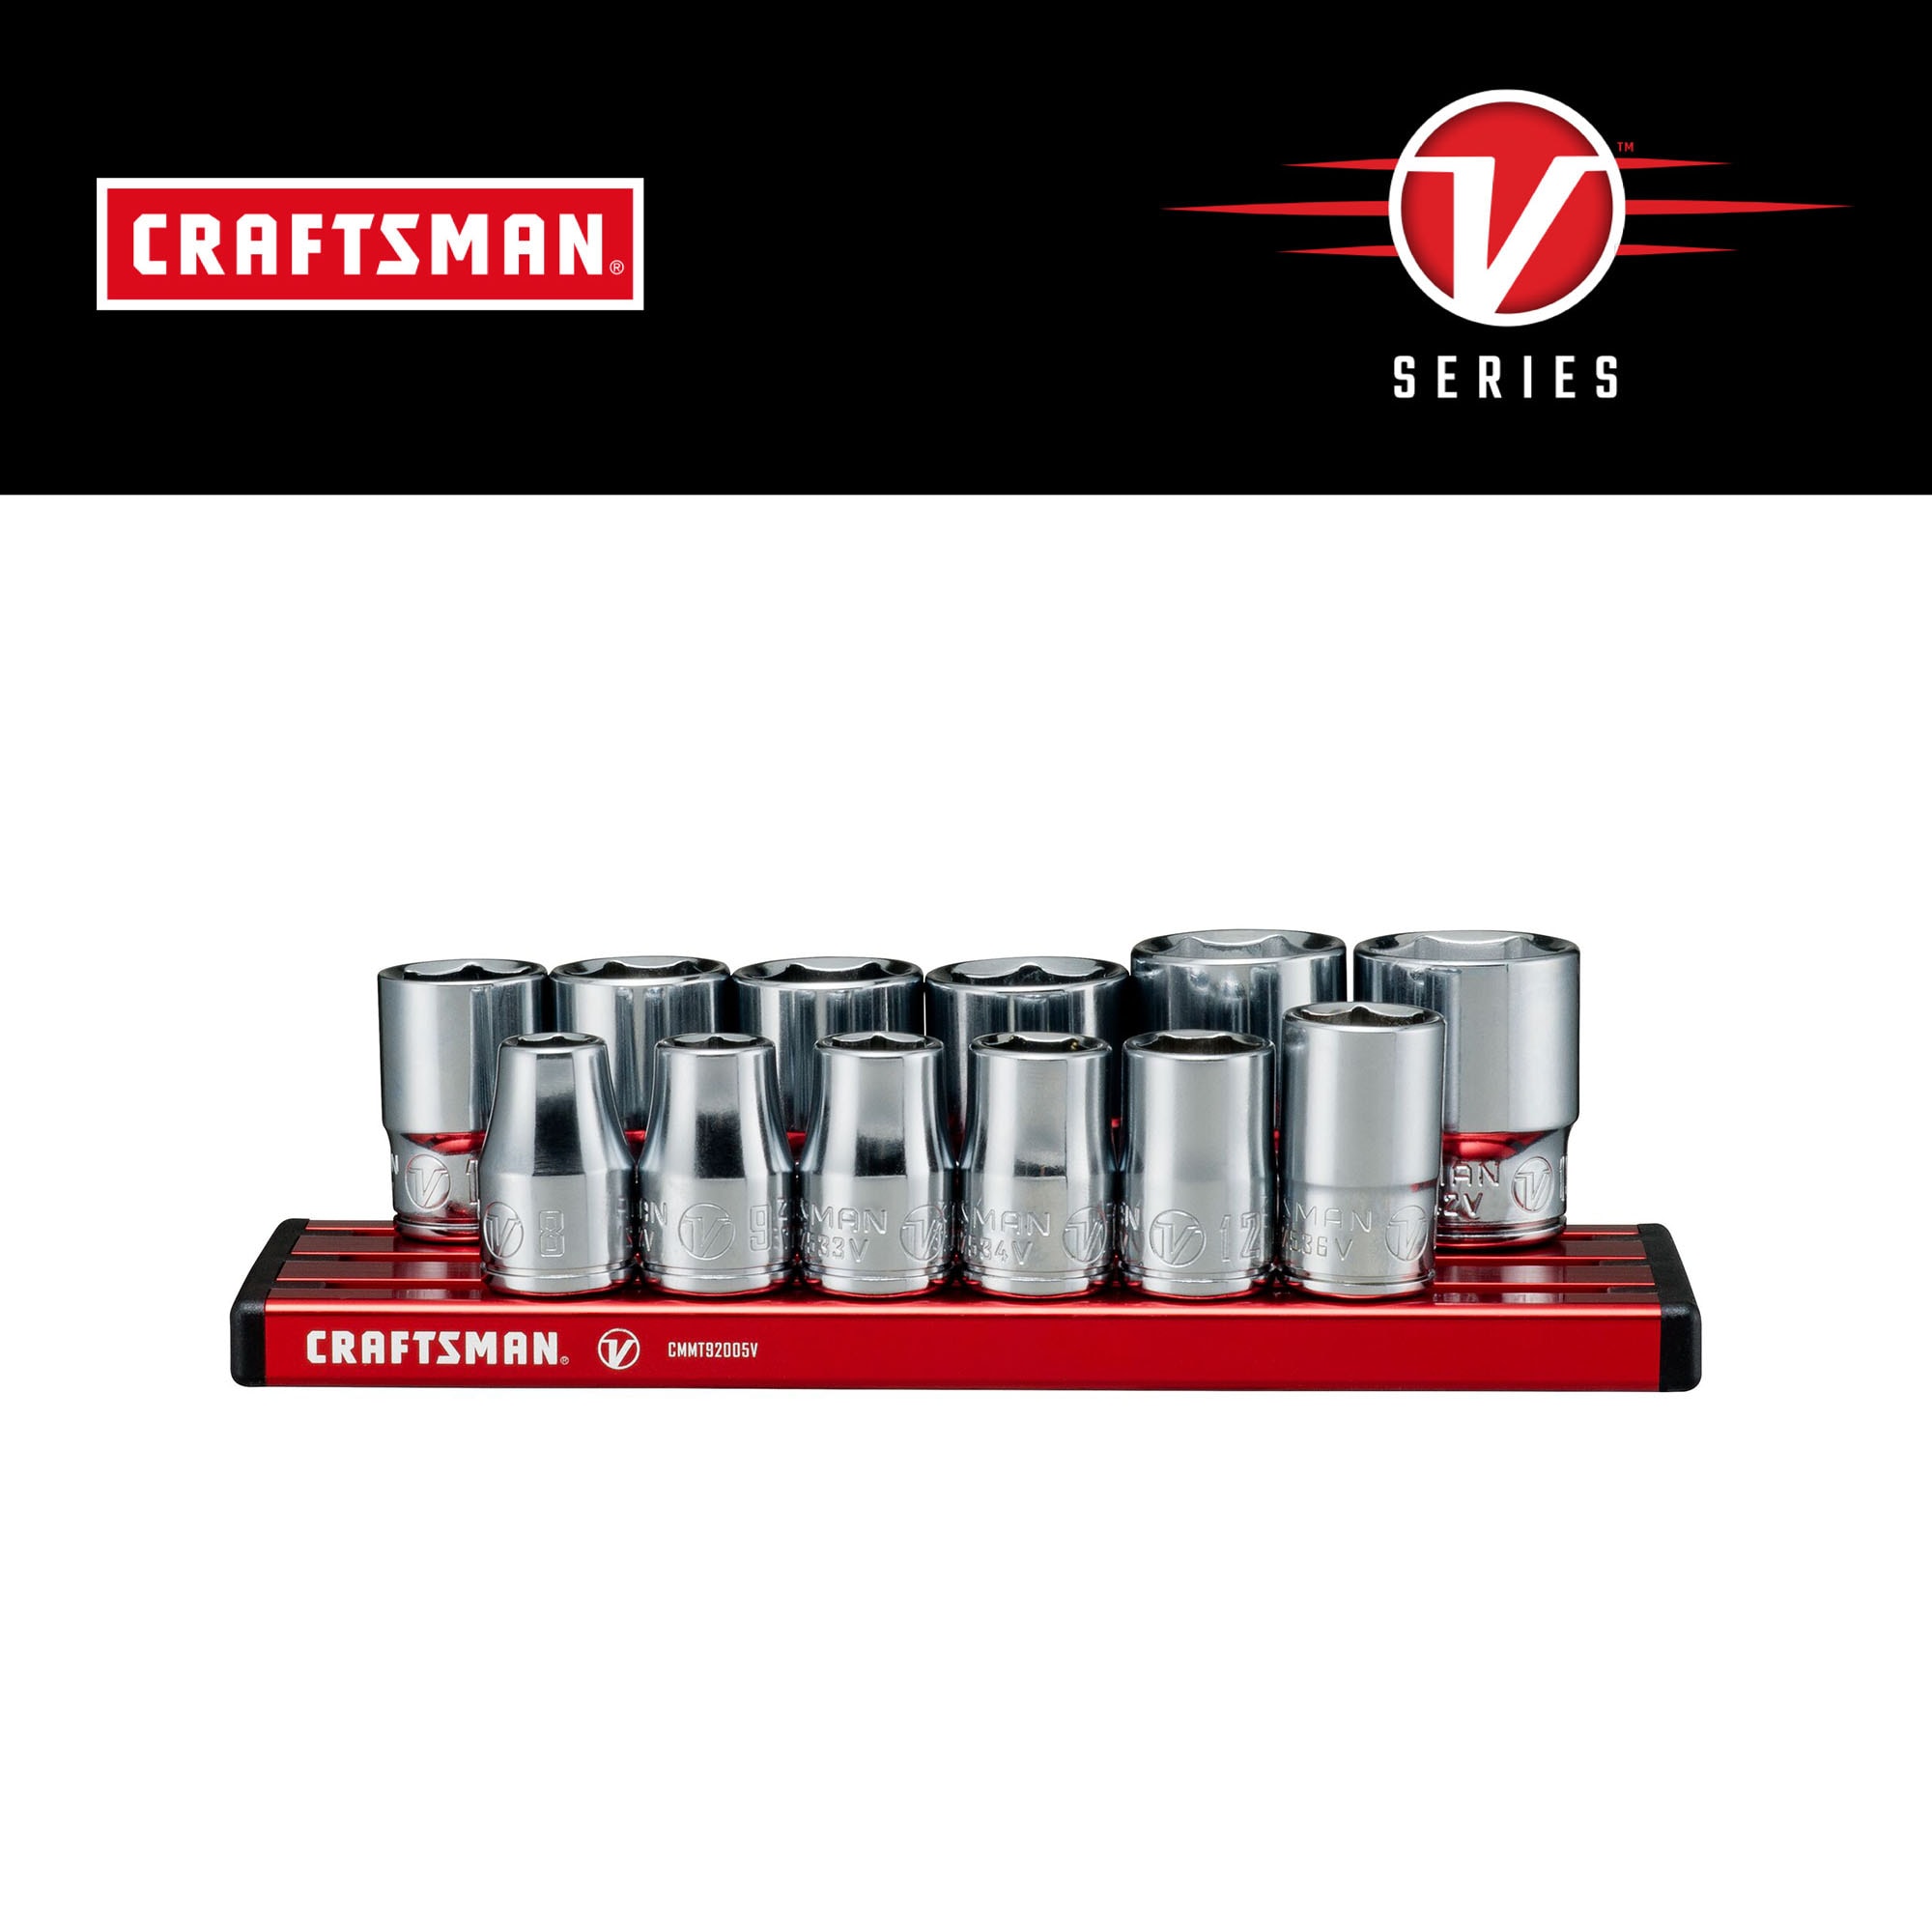 CRAFTSMAN V-Series 10-Piece Metric 1/4-in Drive 6-point Set 